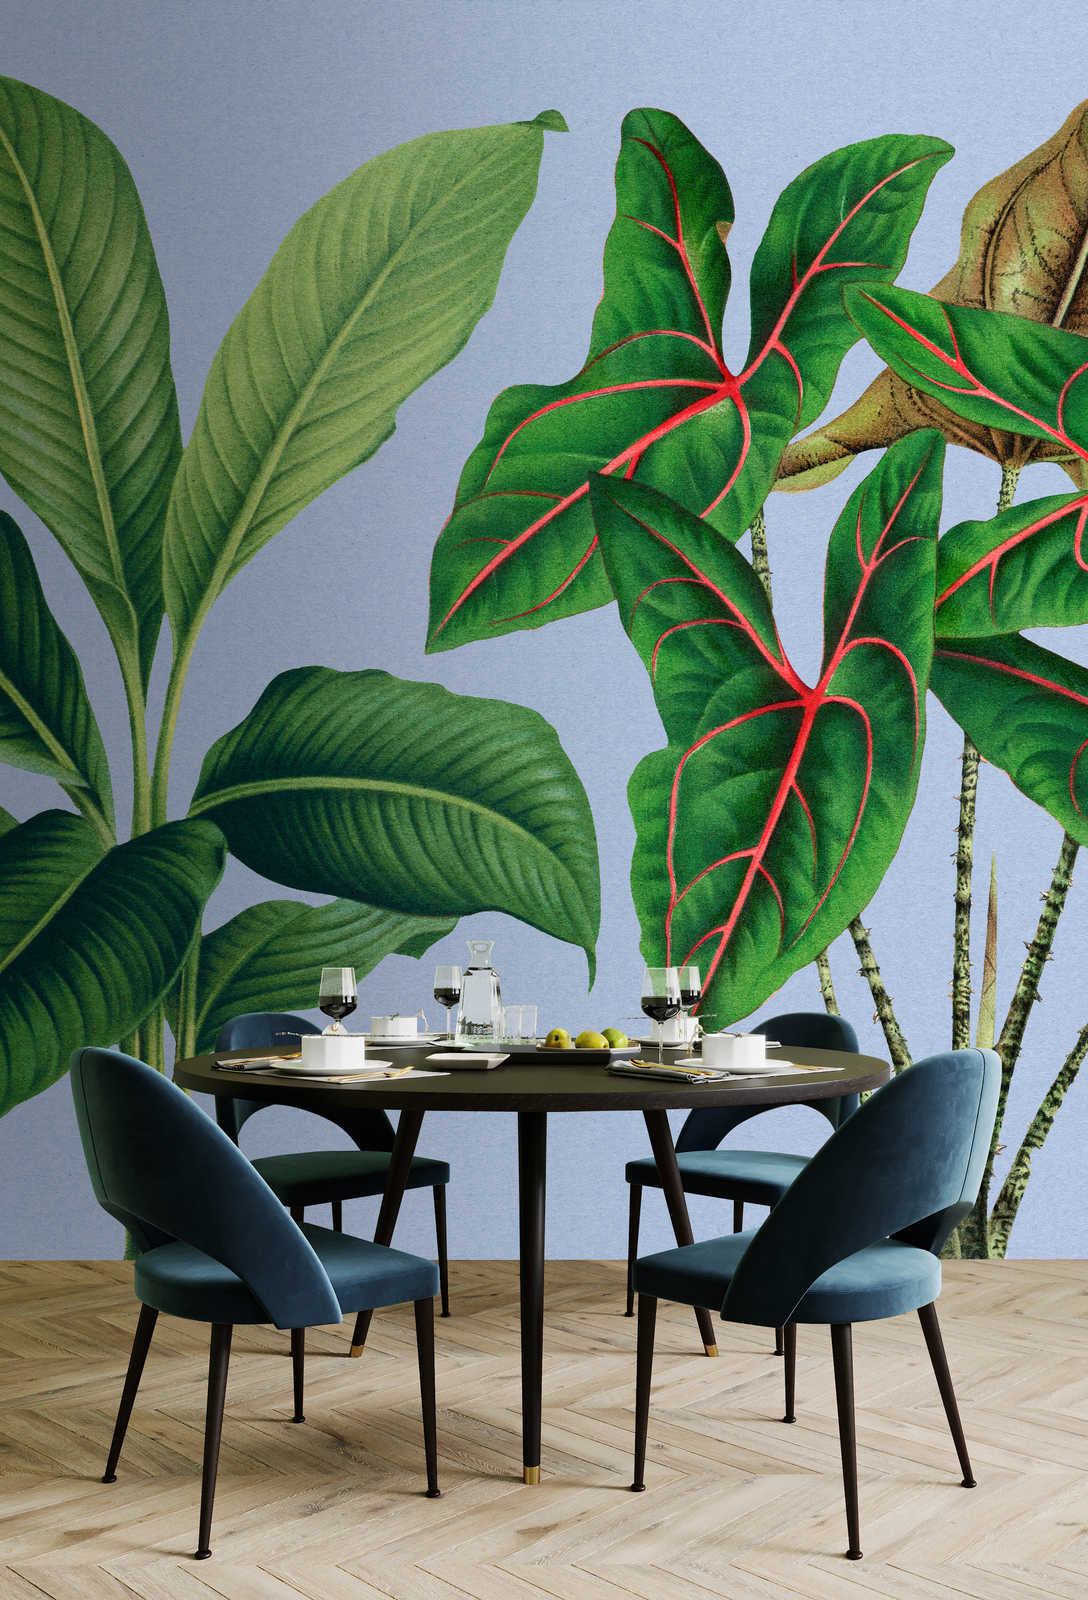             Leaf Garden 1 - leaves mural blue with tropical plants
        